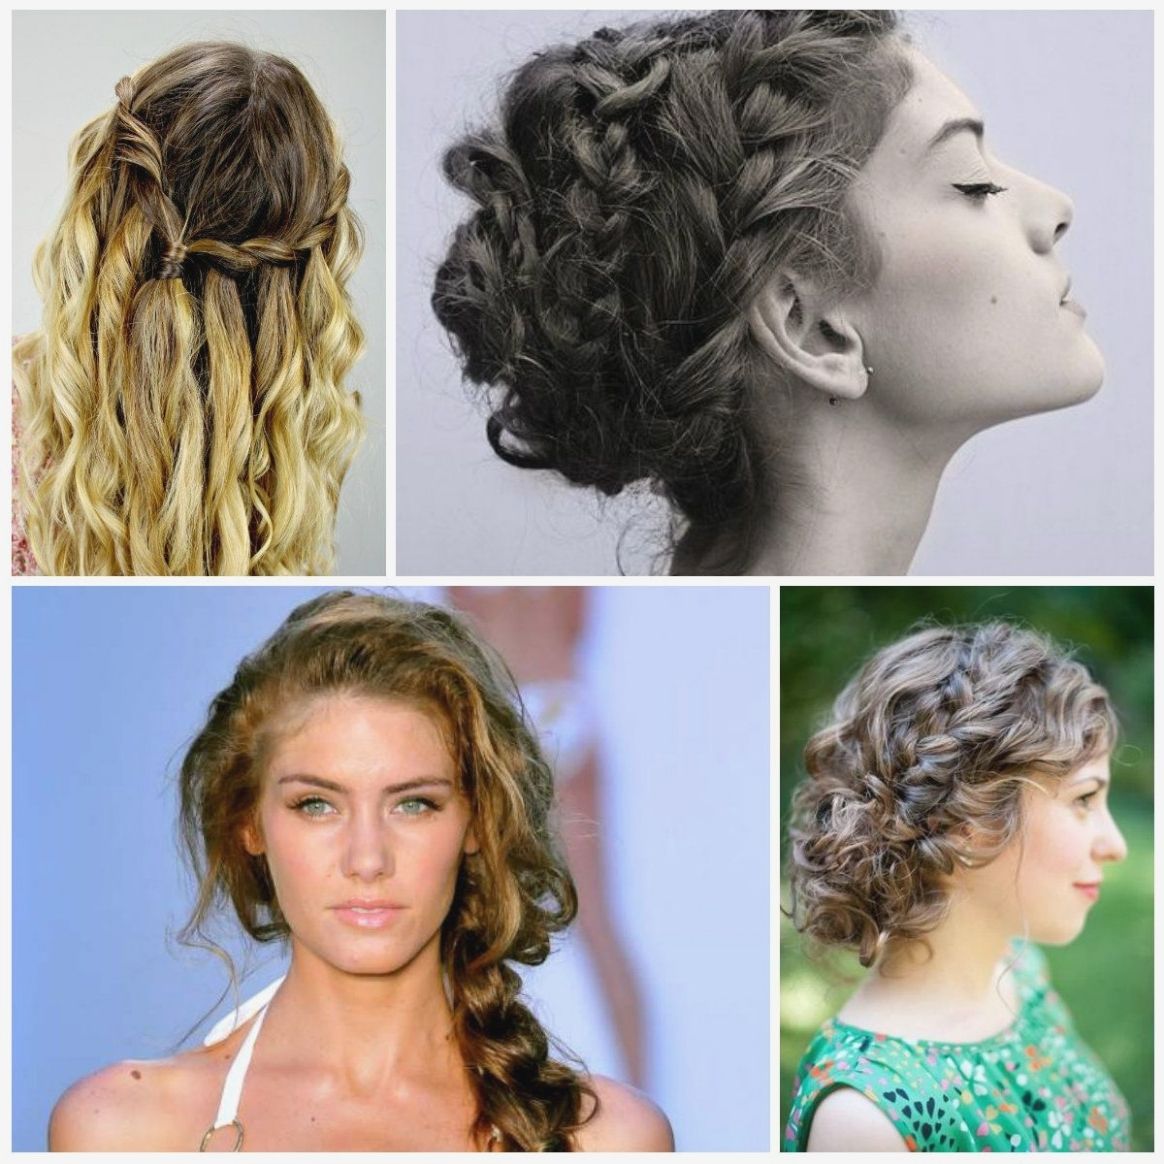 Fashionable Braided Hairstyles On Curly Hair For Braided Bun Hairstyle For Curly Hair – Youtube – Curly Hair Braids (View 9 of 15)